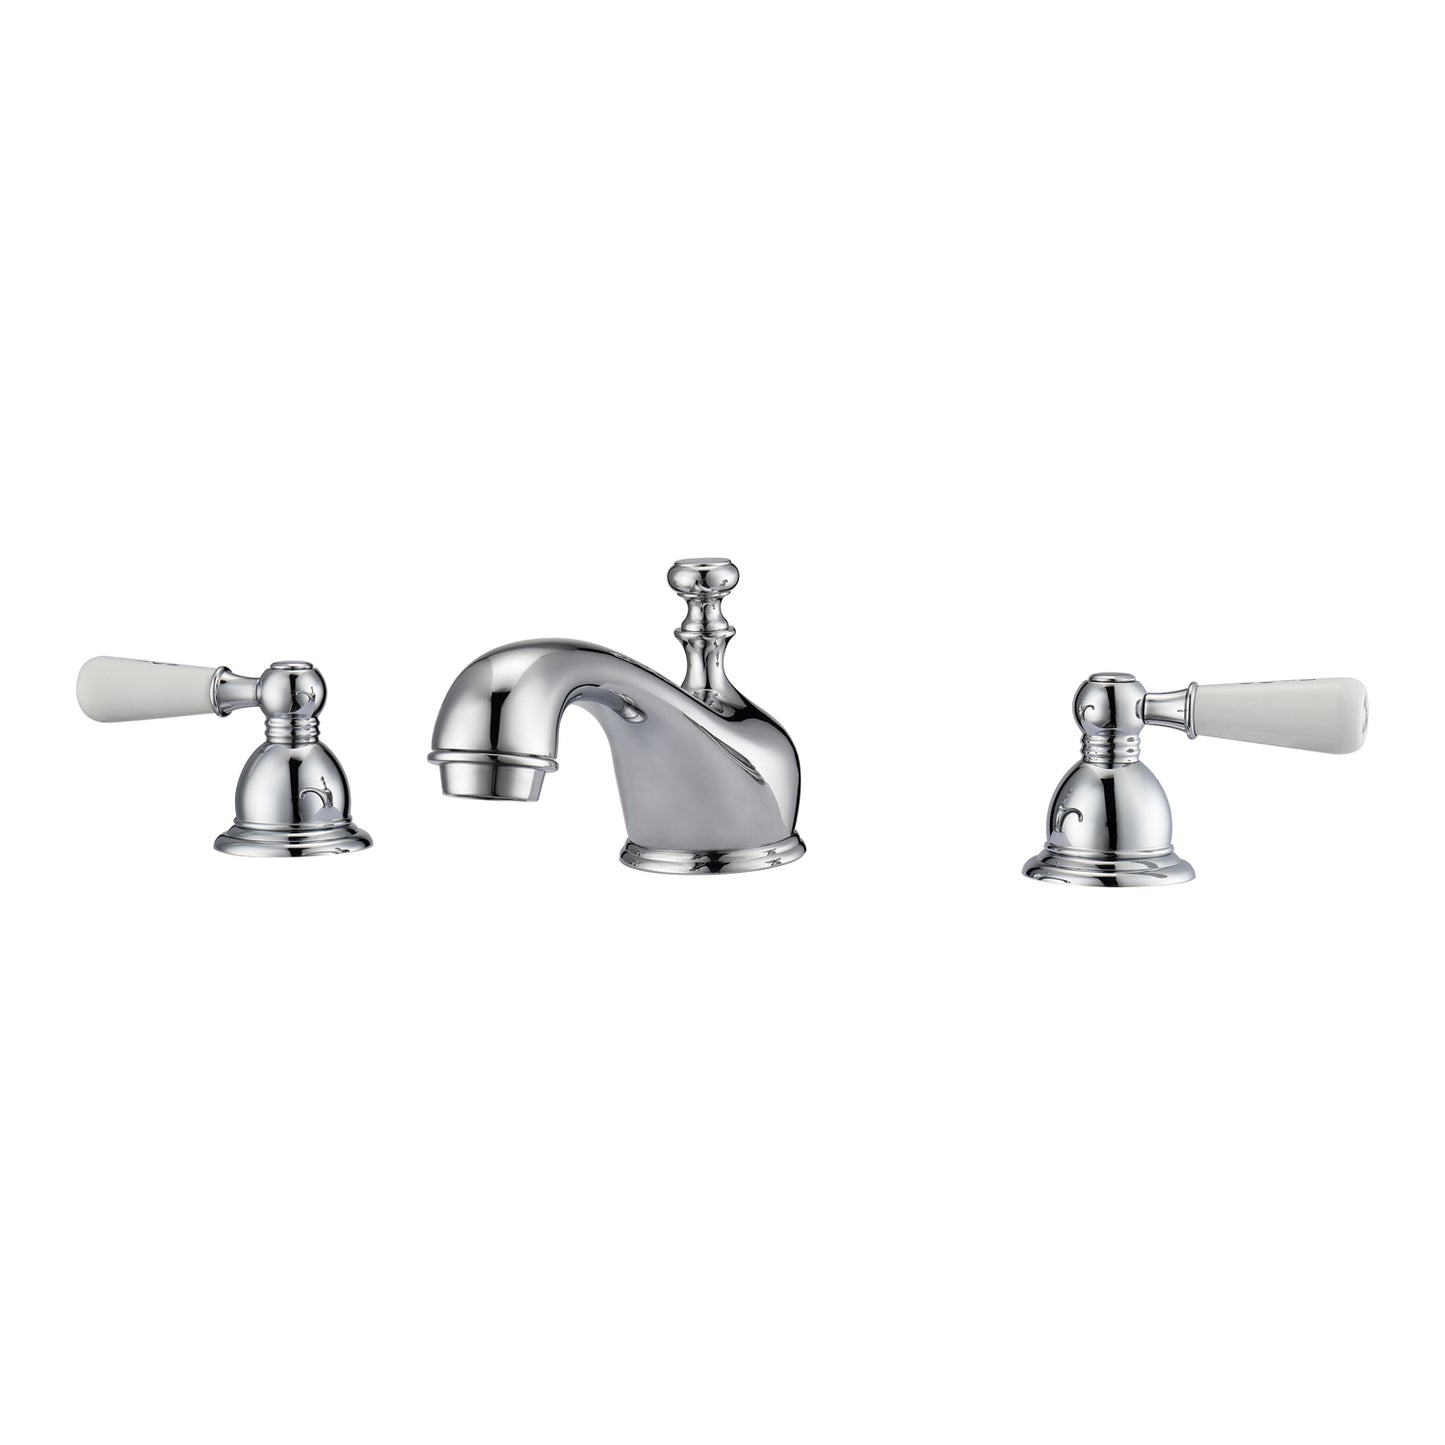 Marsala 8" Widespread Chrome Bathroom Faucet with Porcelain Lever Handles